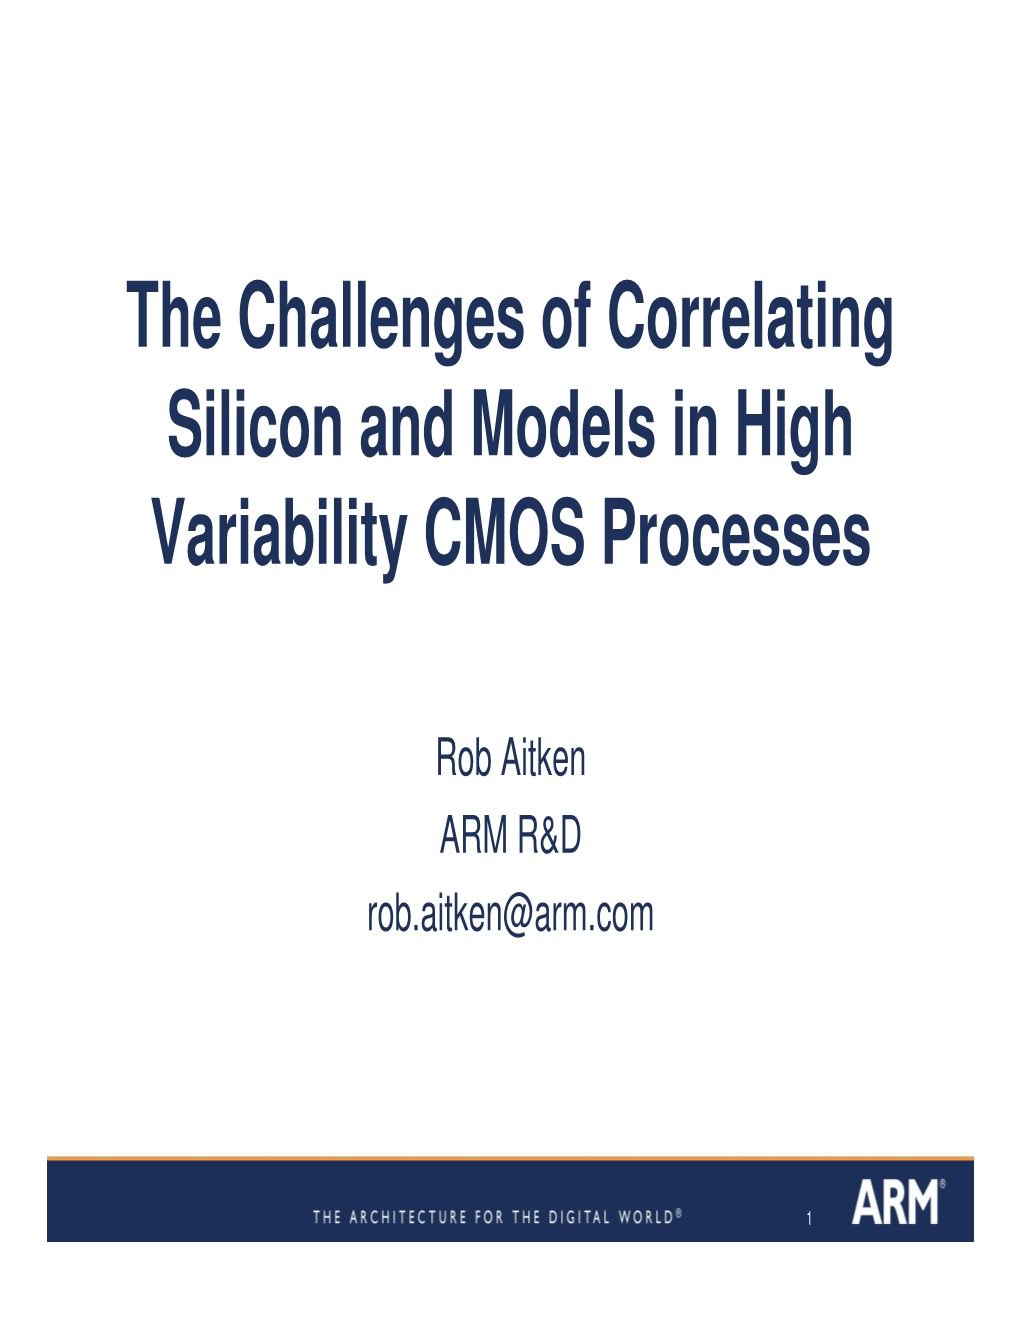 The Challenges of Correlating Silicon and Models in High Variability CMOS Processes